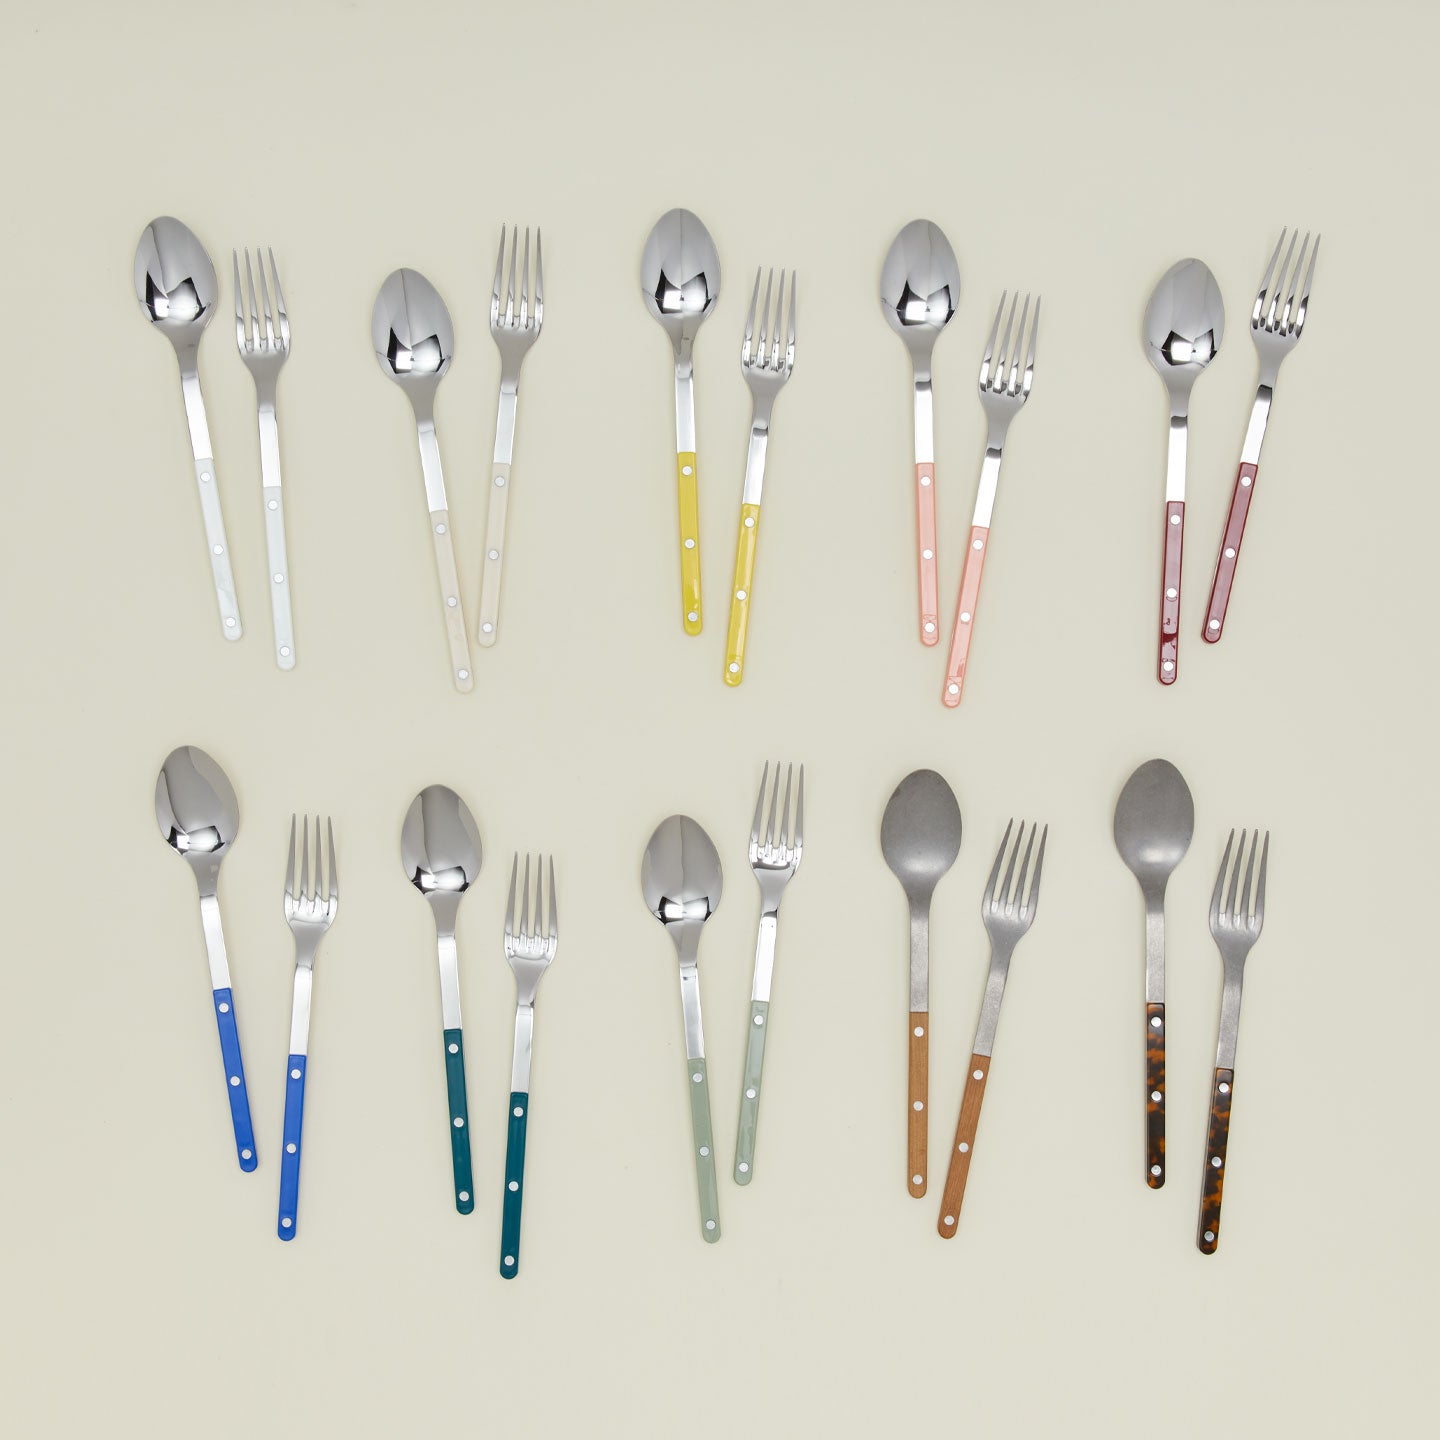 Group of Bistrot Serving Sets in various colors.